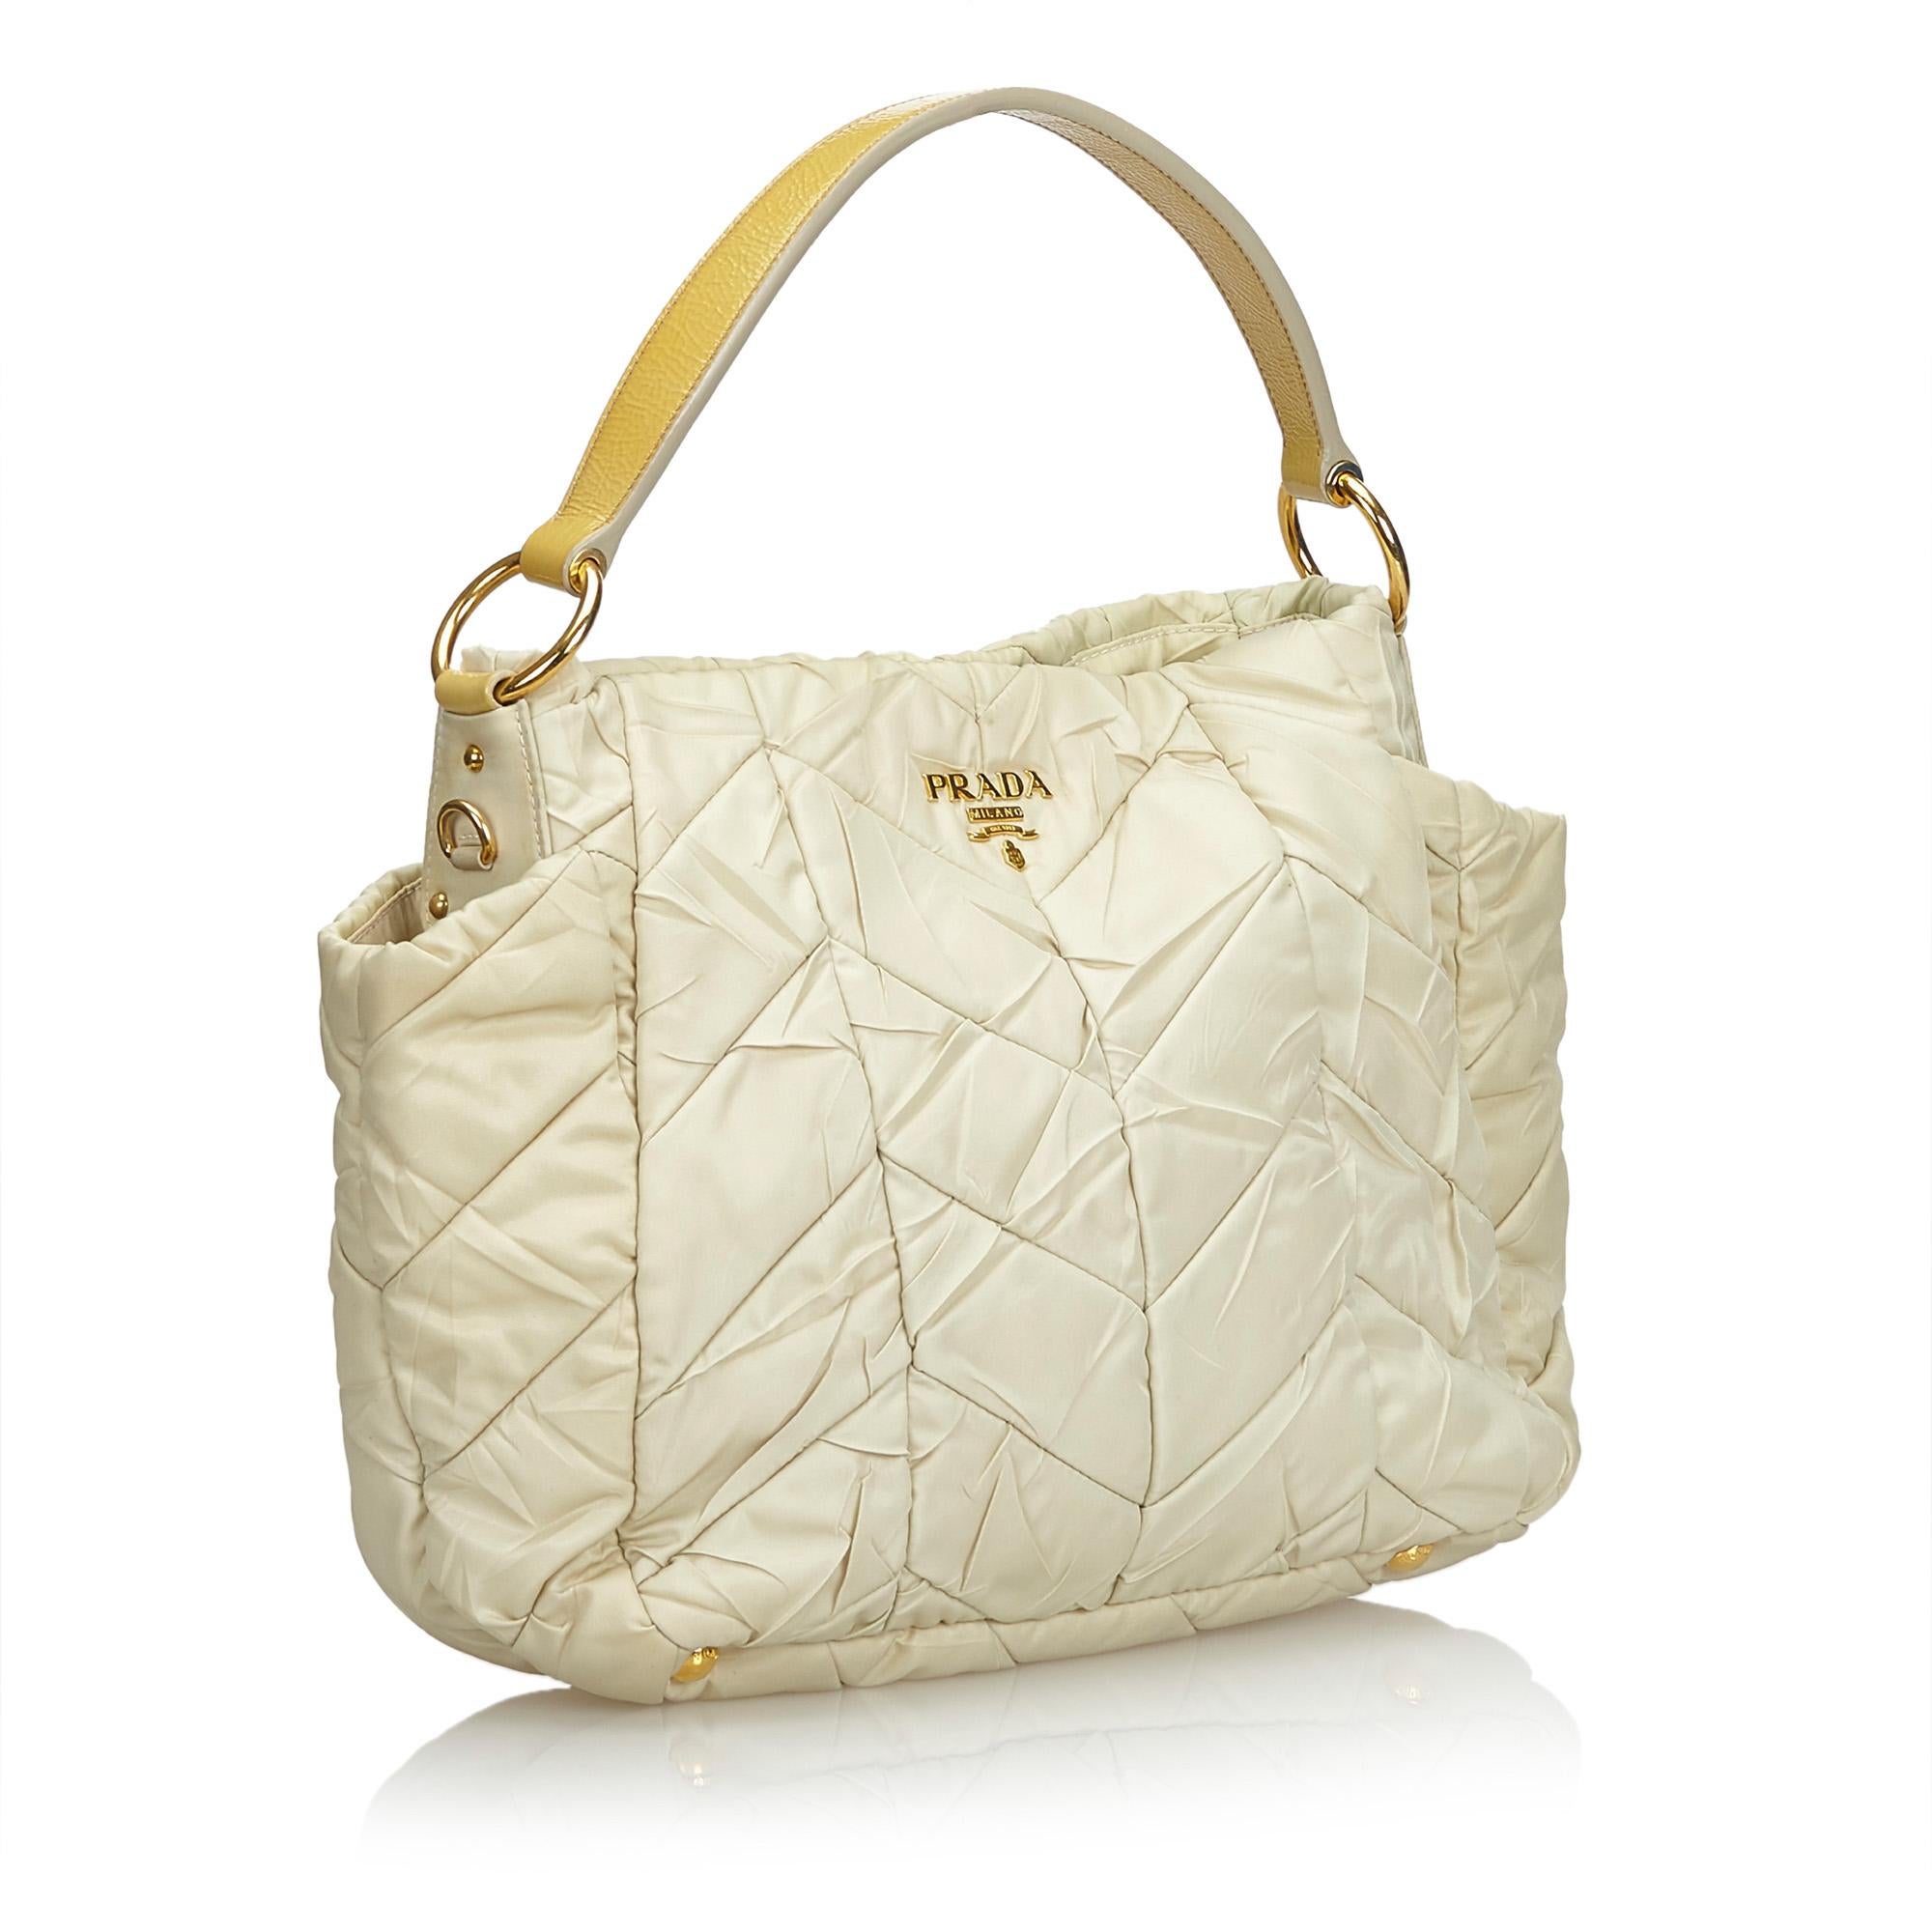 This shoulder bag features a quilted nylon body, side exterior slip pockets, a flat leather top handle, a detachable leather strap, a top zip closure, and interior zip and slip pockets. It carries as AB condition rating.

Inclusions: 
Dust